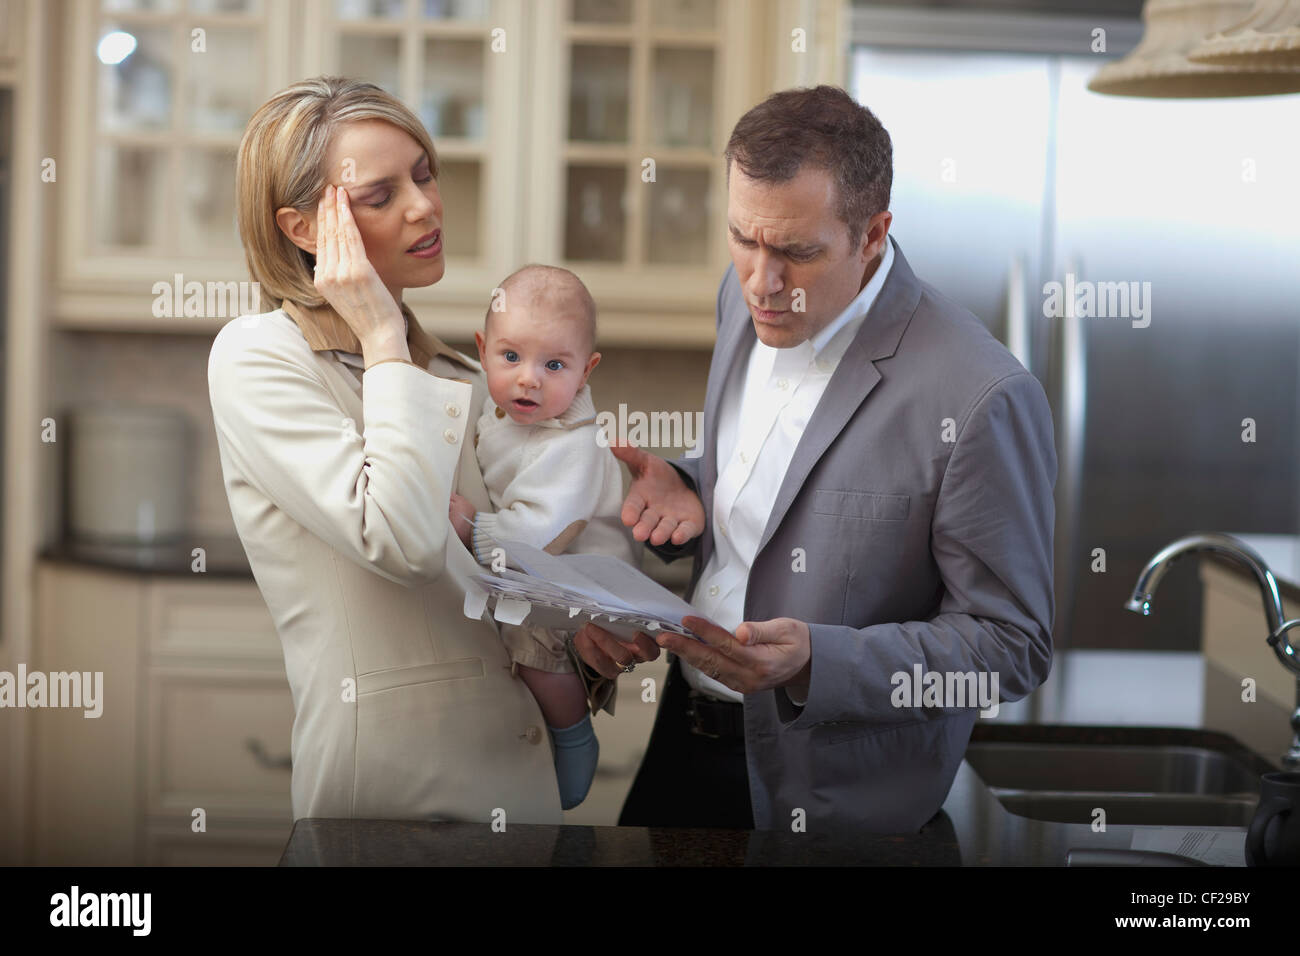 Husband And Wife With Baby Stressing Over Household Bills; Jordan Ontario Canada Stock Photo